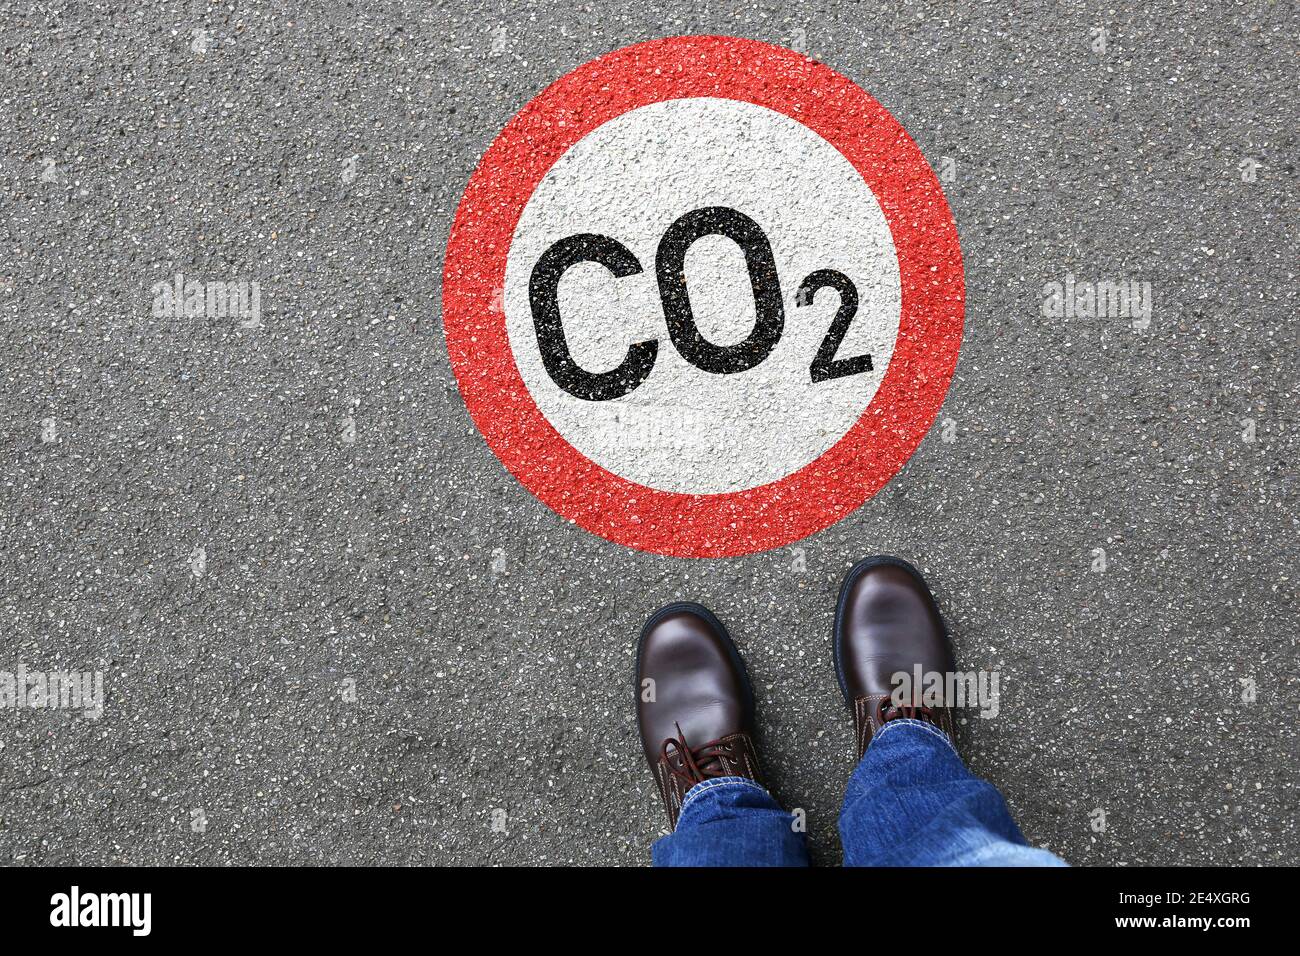 Man people CO2 emissions emission Carbon dioxide air pollution reduction zone concept Stock Photo